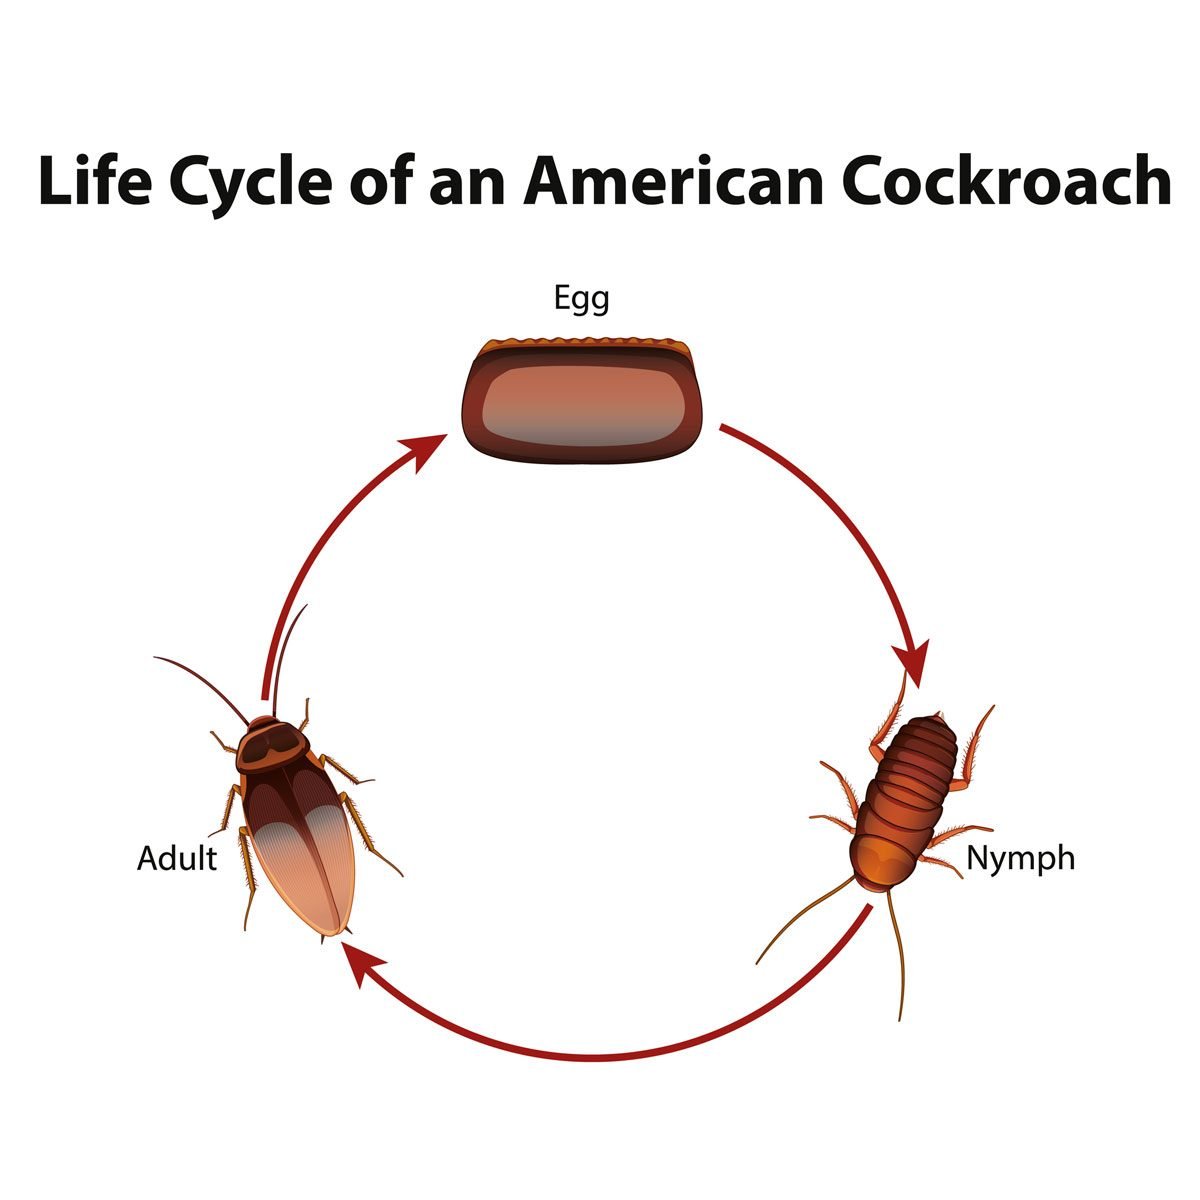 What is the incubation period of cockroach eggs?